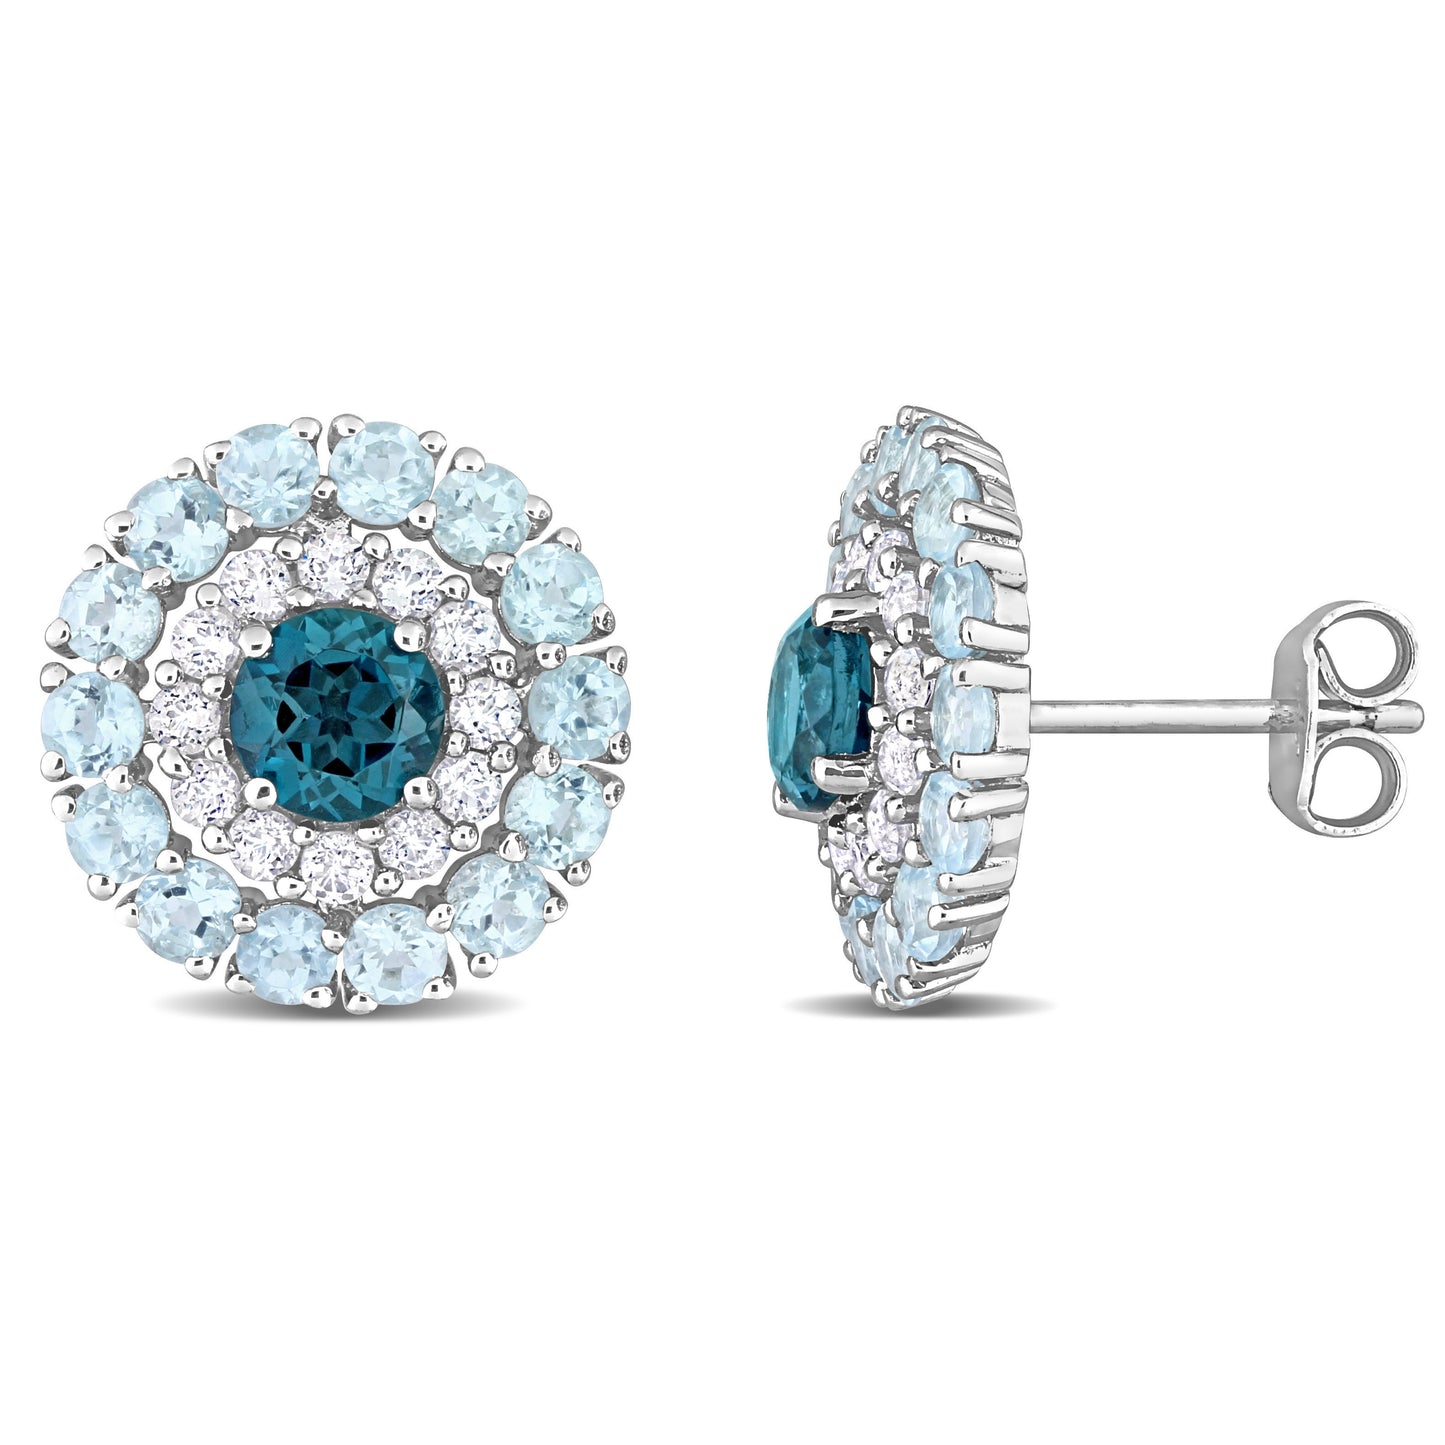 Blue & White Topaz Double Halo Studs in Sterling Silver